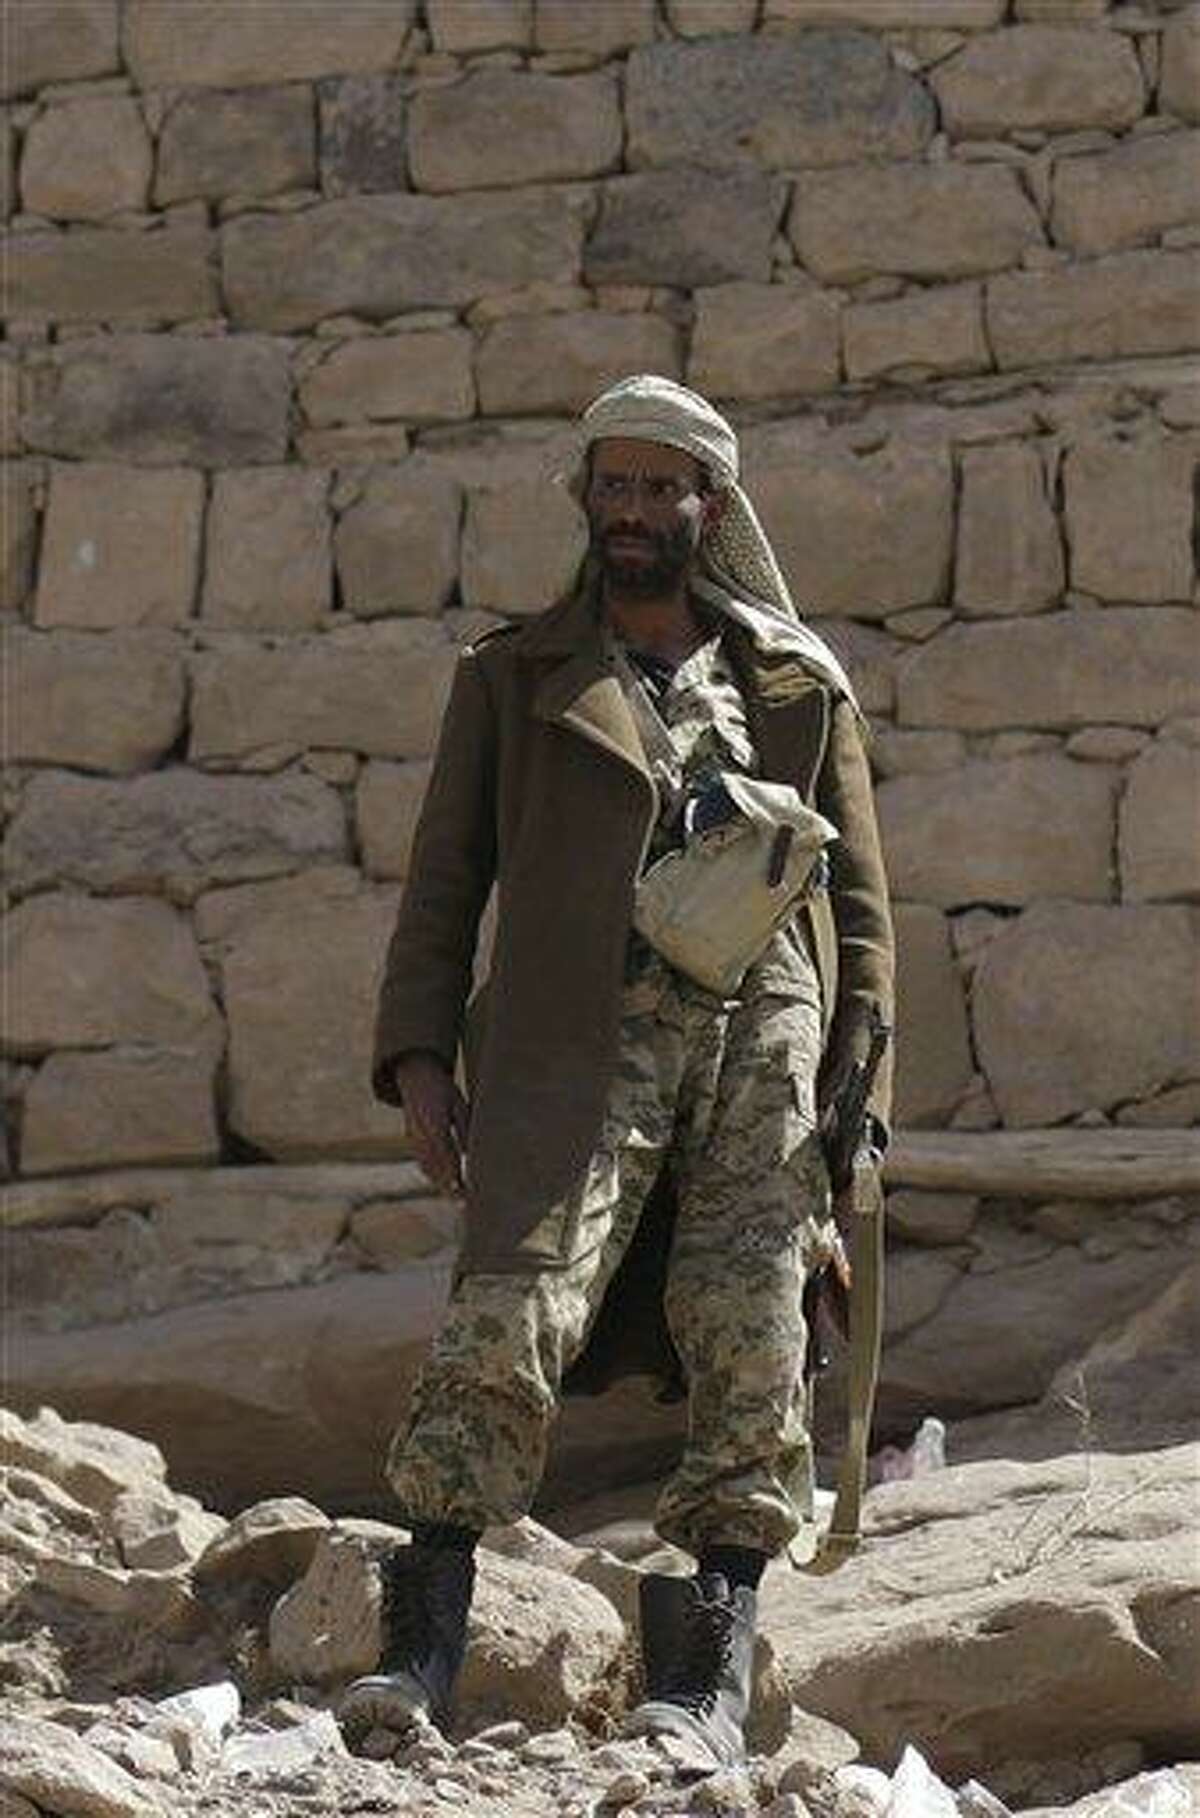 A soldier stands guard outside of Radda Castle, which was recently seized by al-Qaida militants in the town of Radda, 100 miles (160 kilometers) south of the capital, Sanaa, Yemen. A tribal leader involved in negotiating with the militants said al-Qaida militants had withdrawn from Radda, leaving the town in the control of two prominent sheiks. Associated Press